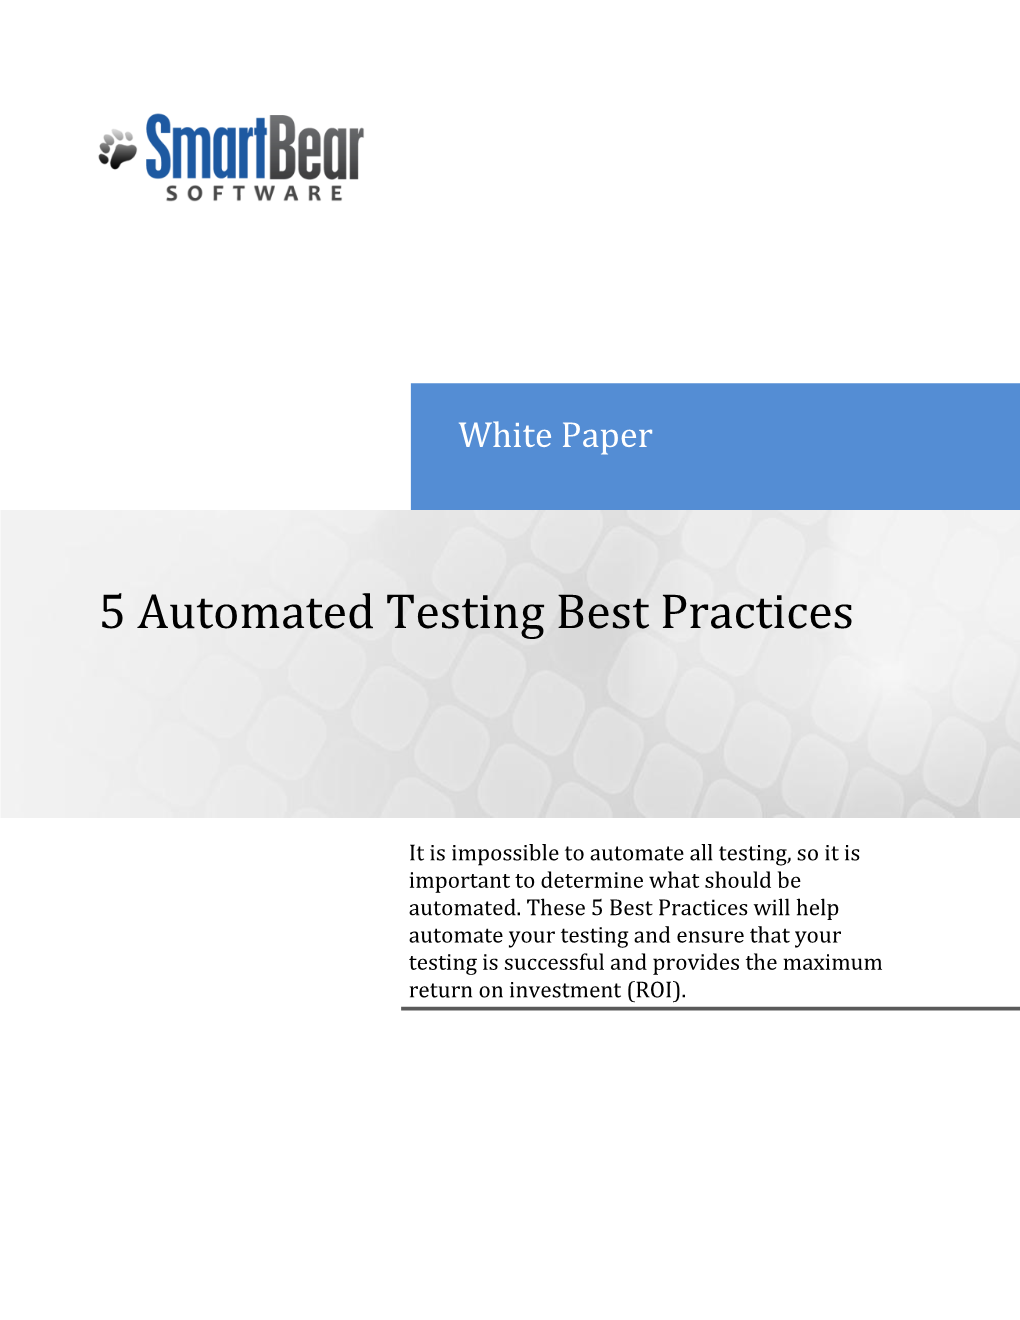 5 Automated Testing Best Practices